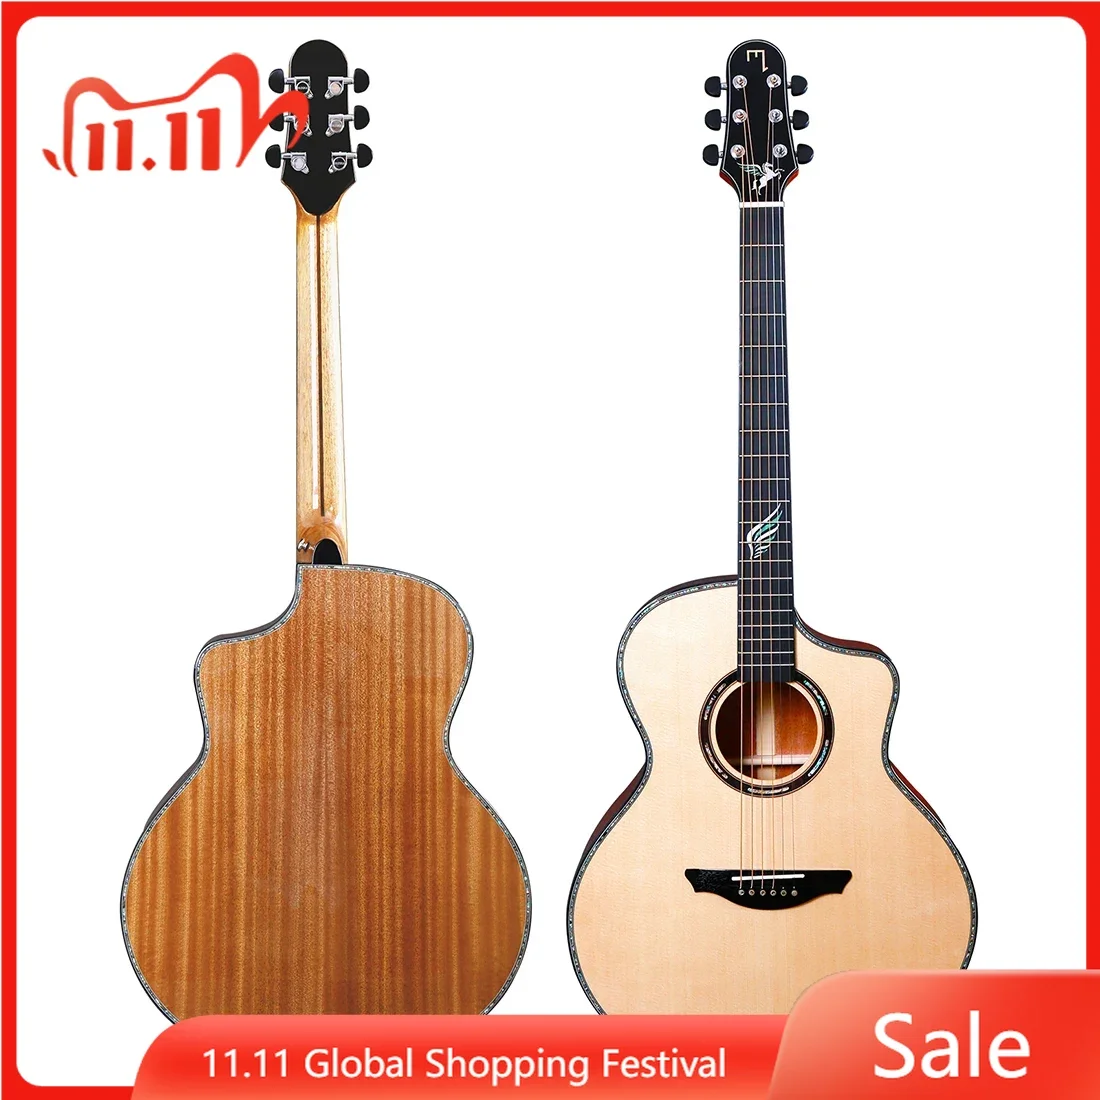 

40 Inch JF Acoustic Guitar High Quality Professional Classical Spruce Solid Wood Folk Guitar Kit Gitarre with Capo Picks